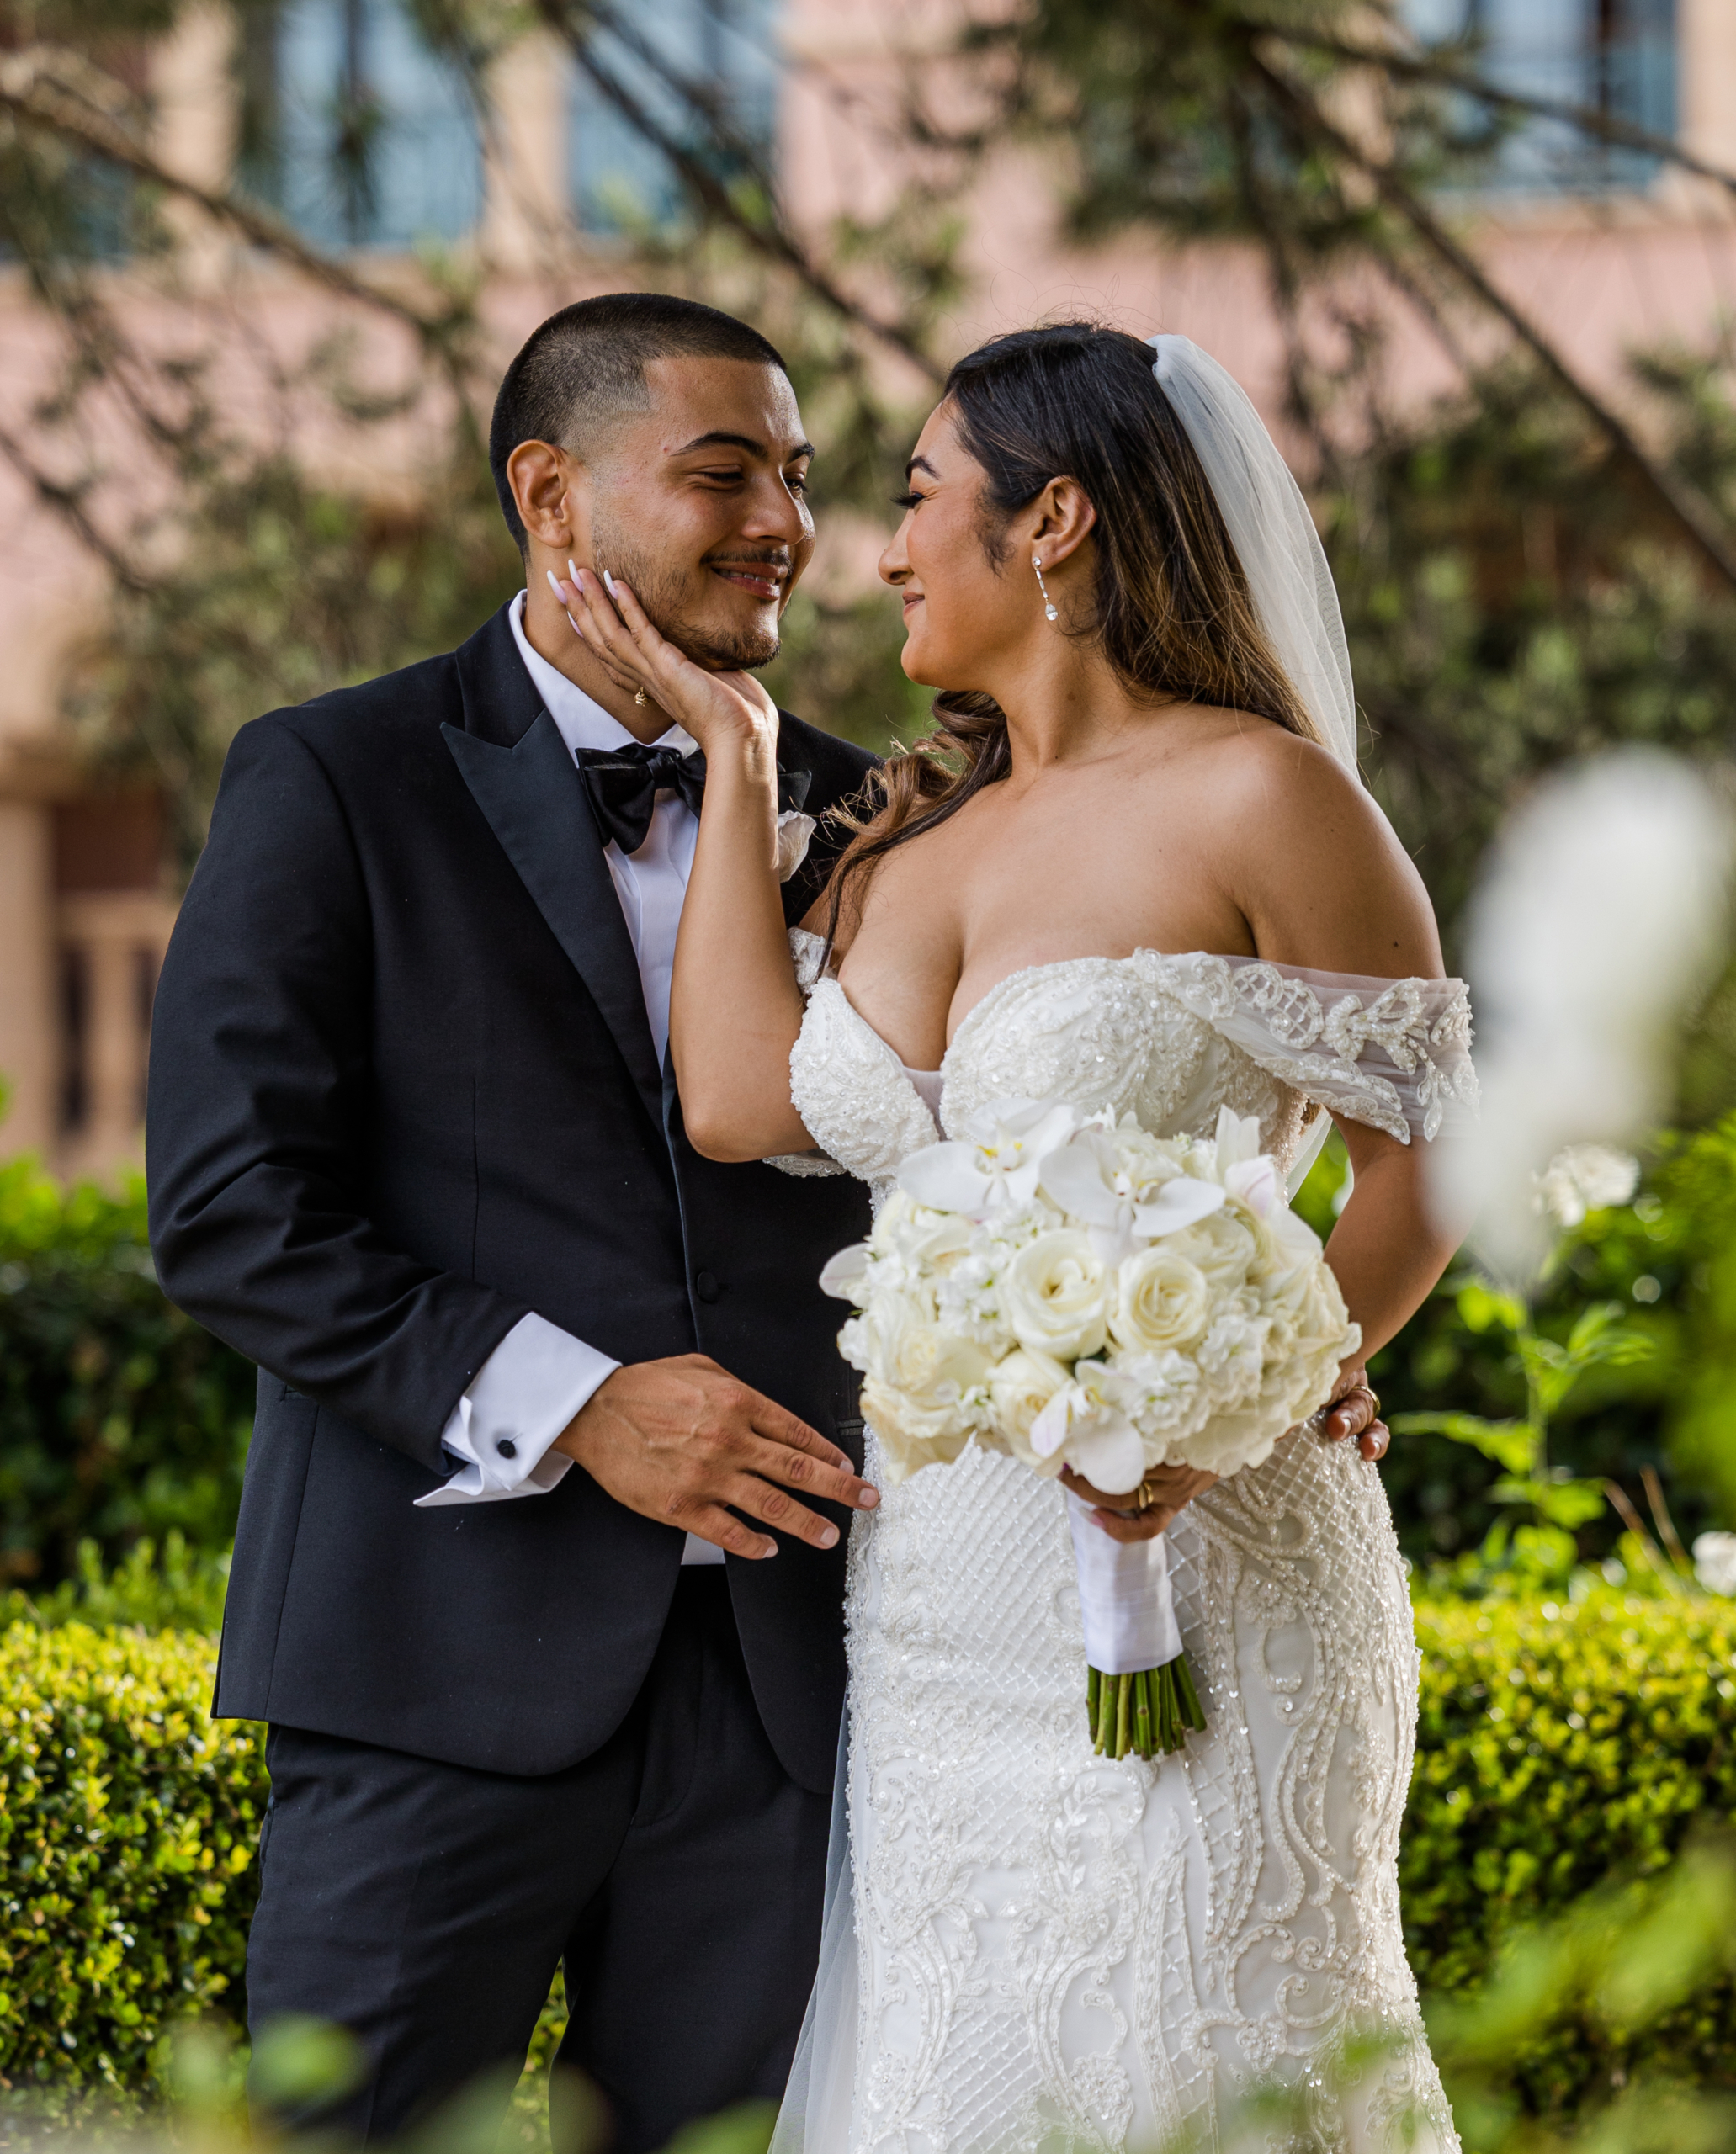 Bride and groom on their wedding day at Fairmont Grand Del Mar captured by Carlsbad Photo